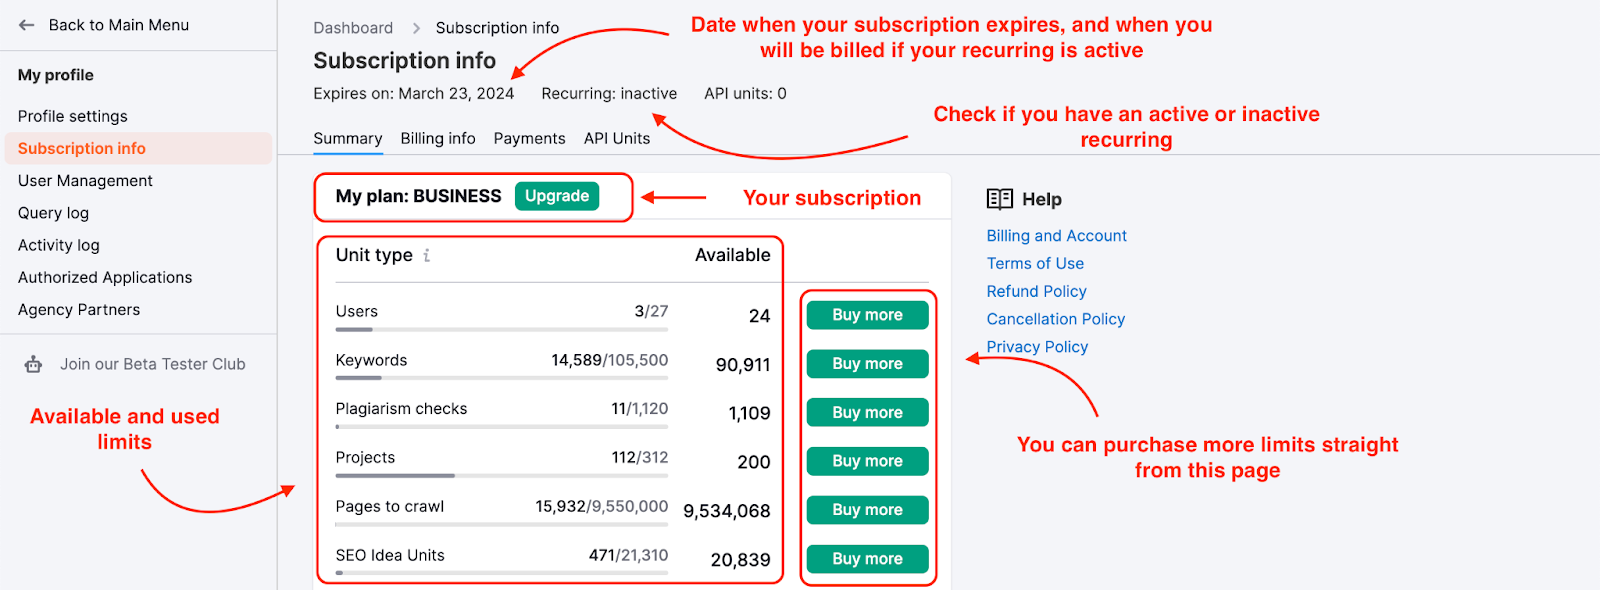 In this screenshot from the Summary tab in Subscription info, where you can find subscription expiration date, your level of subscription and subscription limits, etc